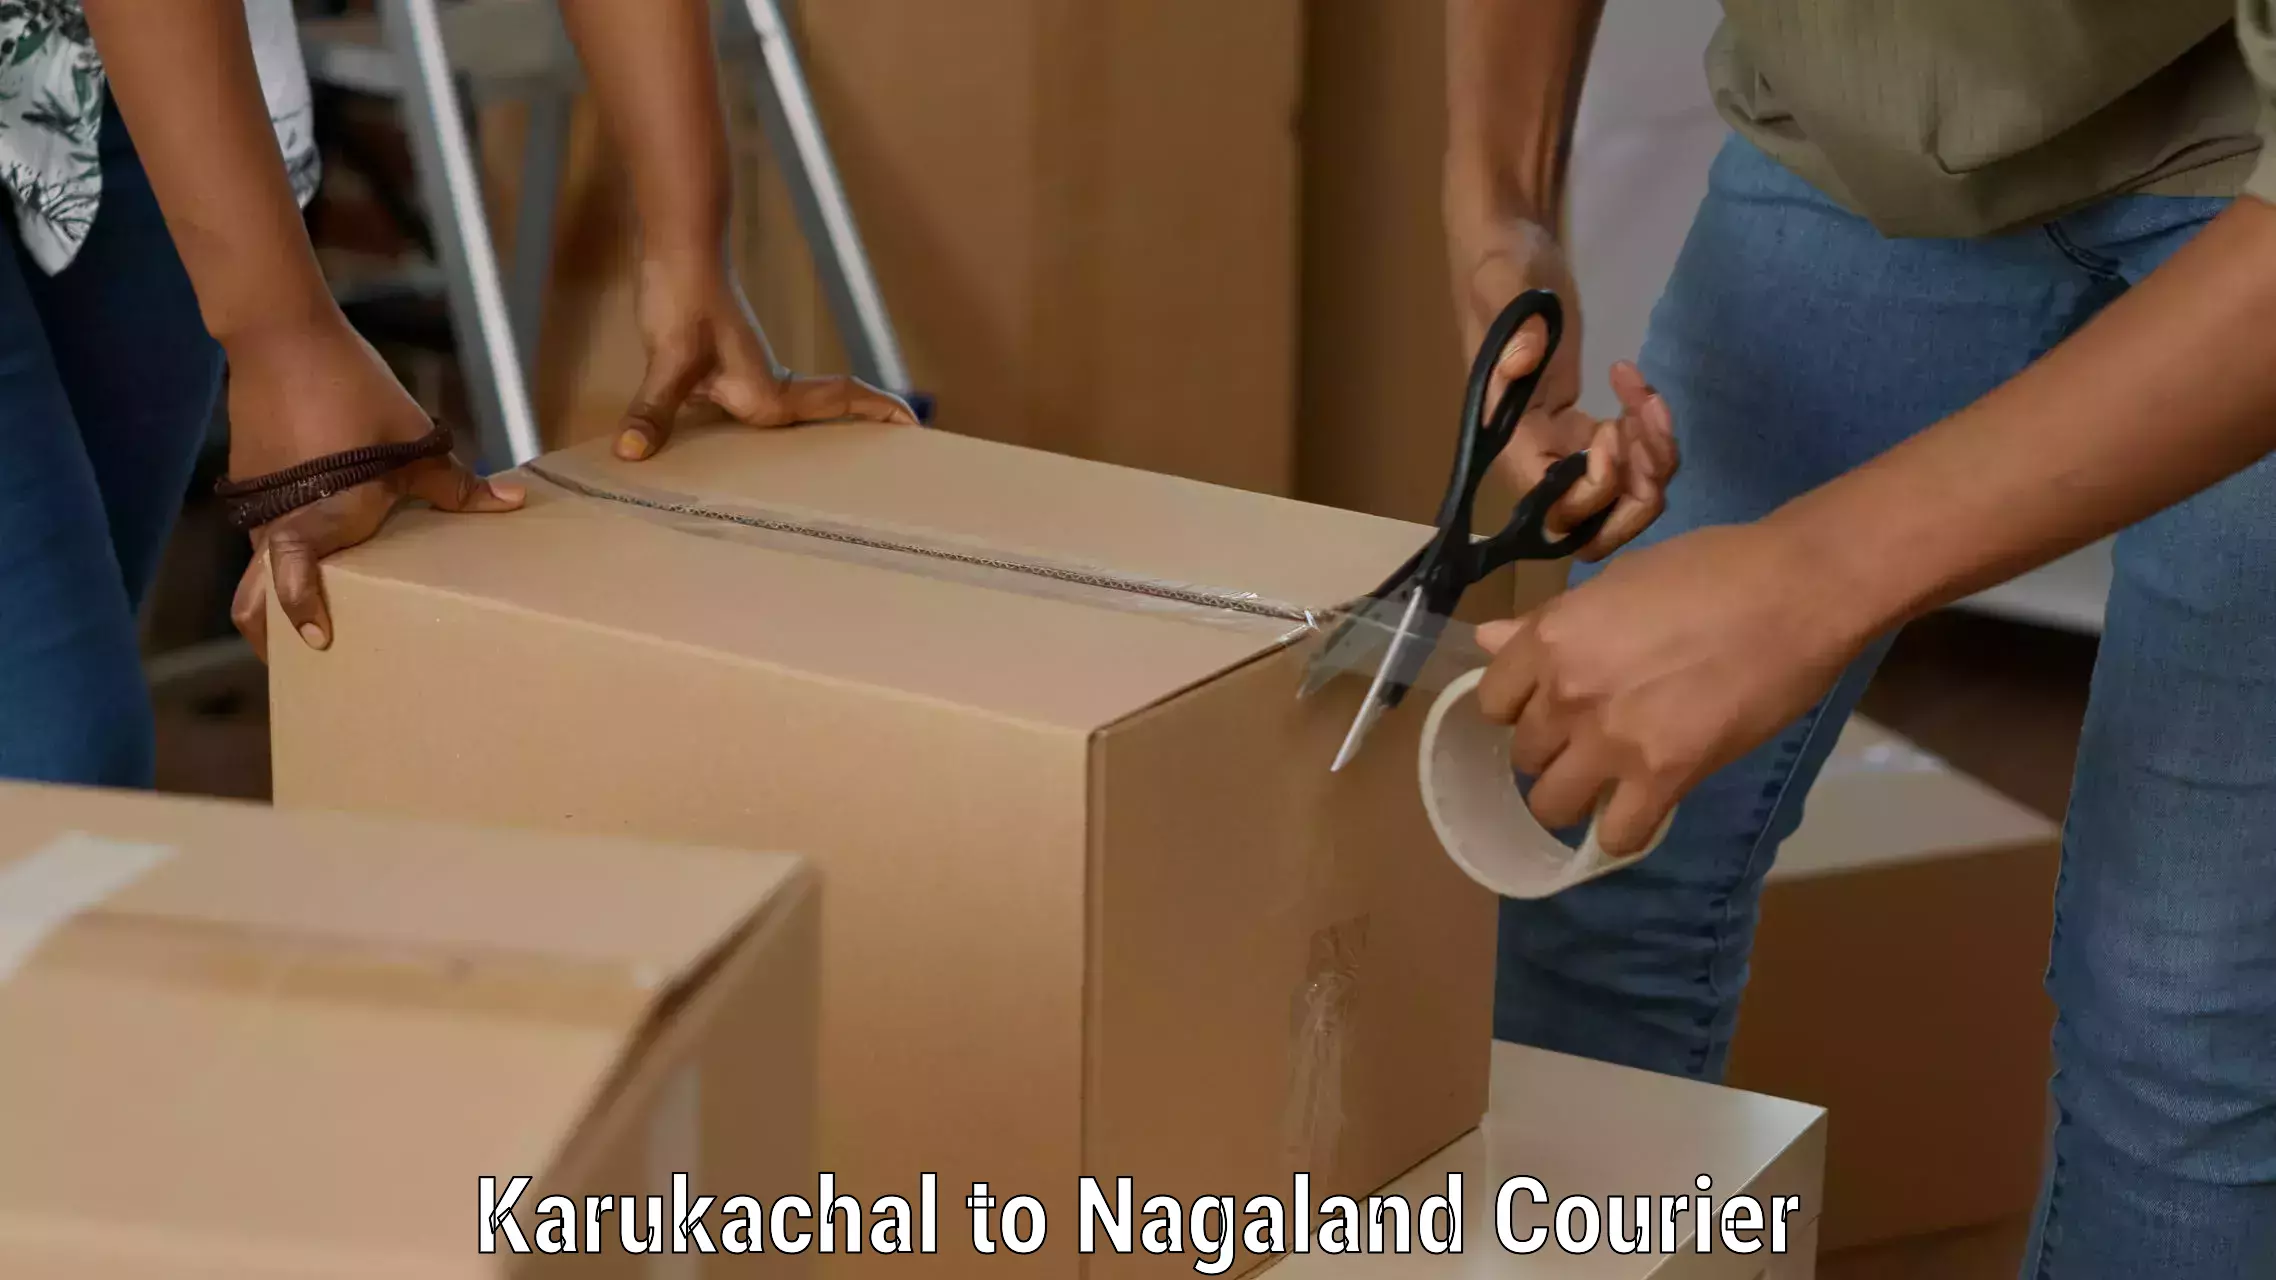 Reliable courier service in Karukachal to Dimapur